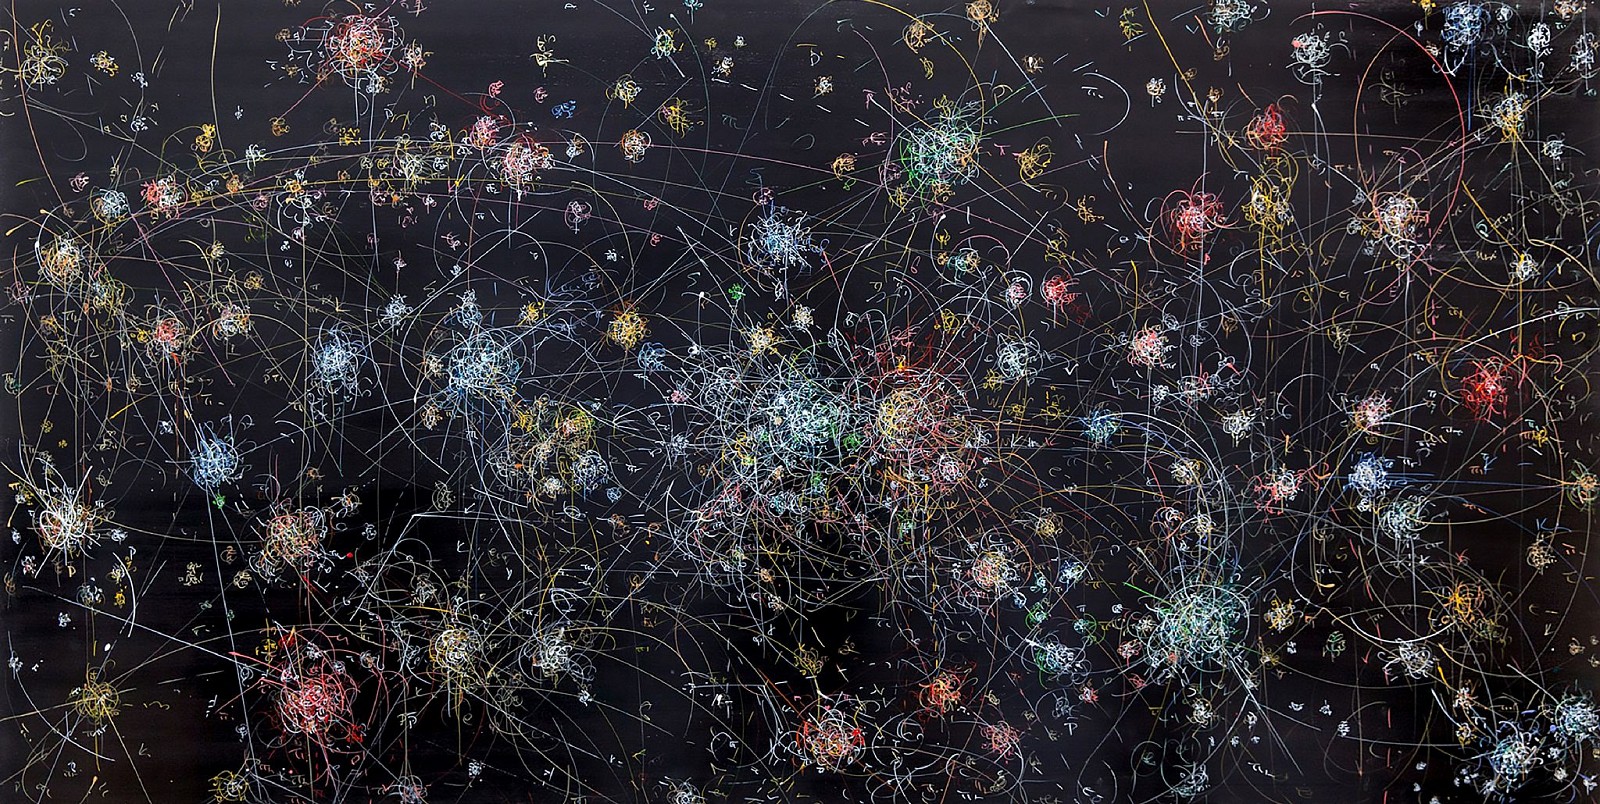 Kysa Johnson, Blow Up 288 - the long goodbye - subatomic decay patterns with the Sagittarius Star Cloud, 2016
ink and high gloss on board, 36 x 72 in.
JOHK00009